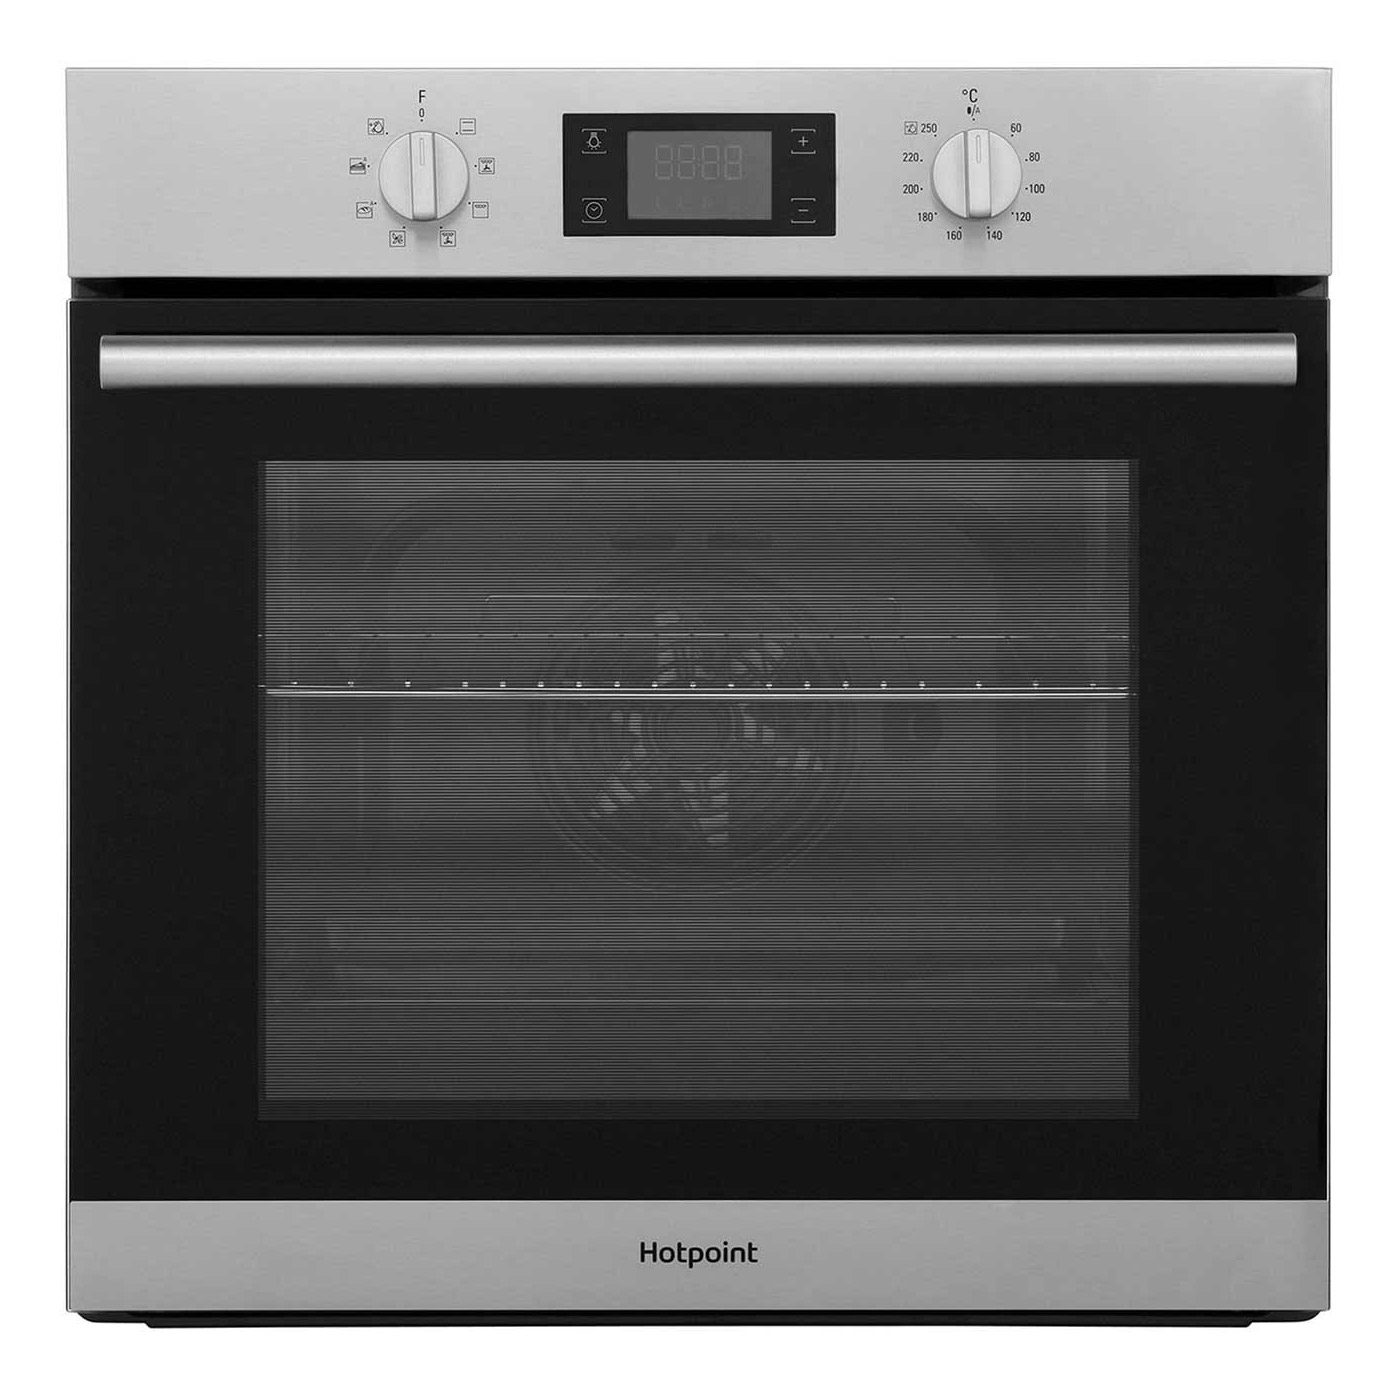 Hotpoint SA2540HIX Built In Electric Single Oven in St Steel 66L